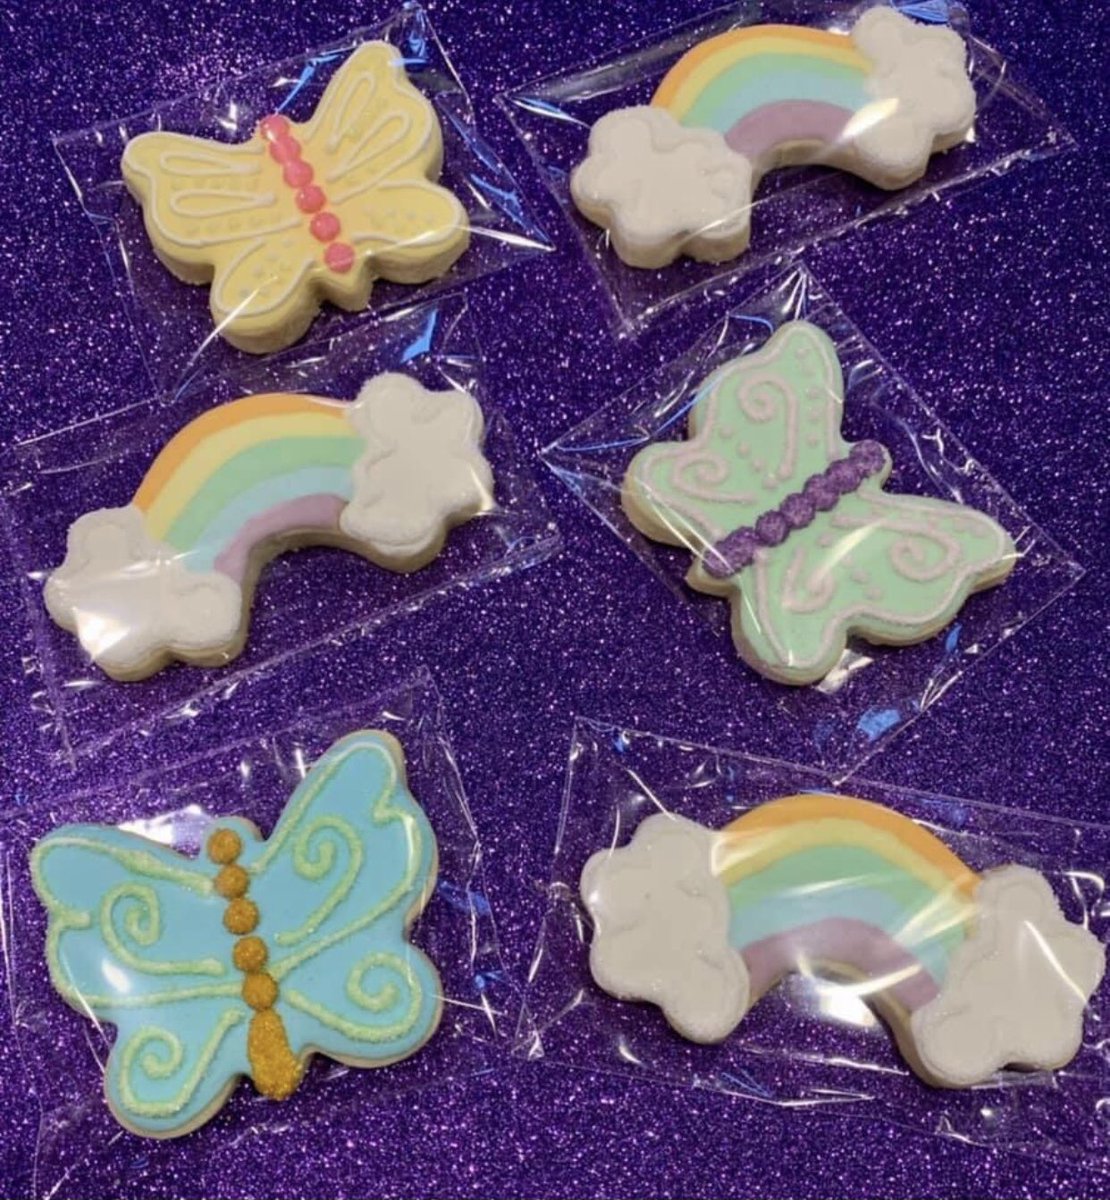 With gorgeous weather like today’s, it’s only “rainbows & butterflies” in my mind! 💖 🌈 🦋 🌸 #ilovespring #hellospring #plantingseason #outdooradventures #bakingtherapy #sugarcookies #sugarcookiedecorating #rainbowsandbutterflies #rainbows